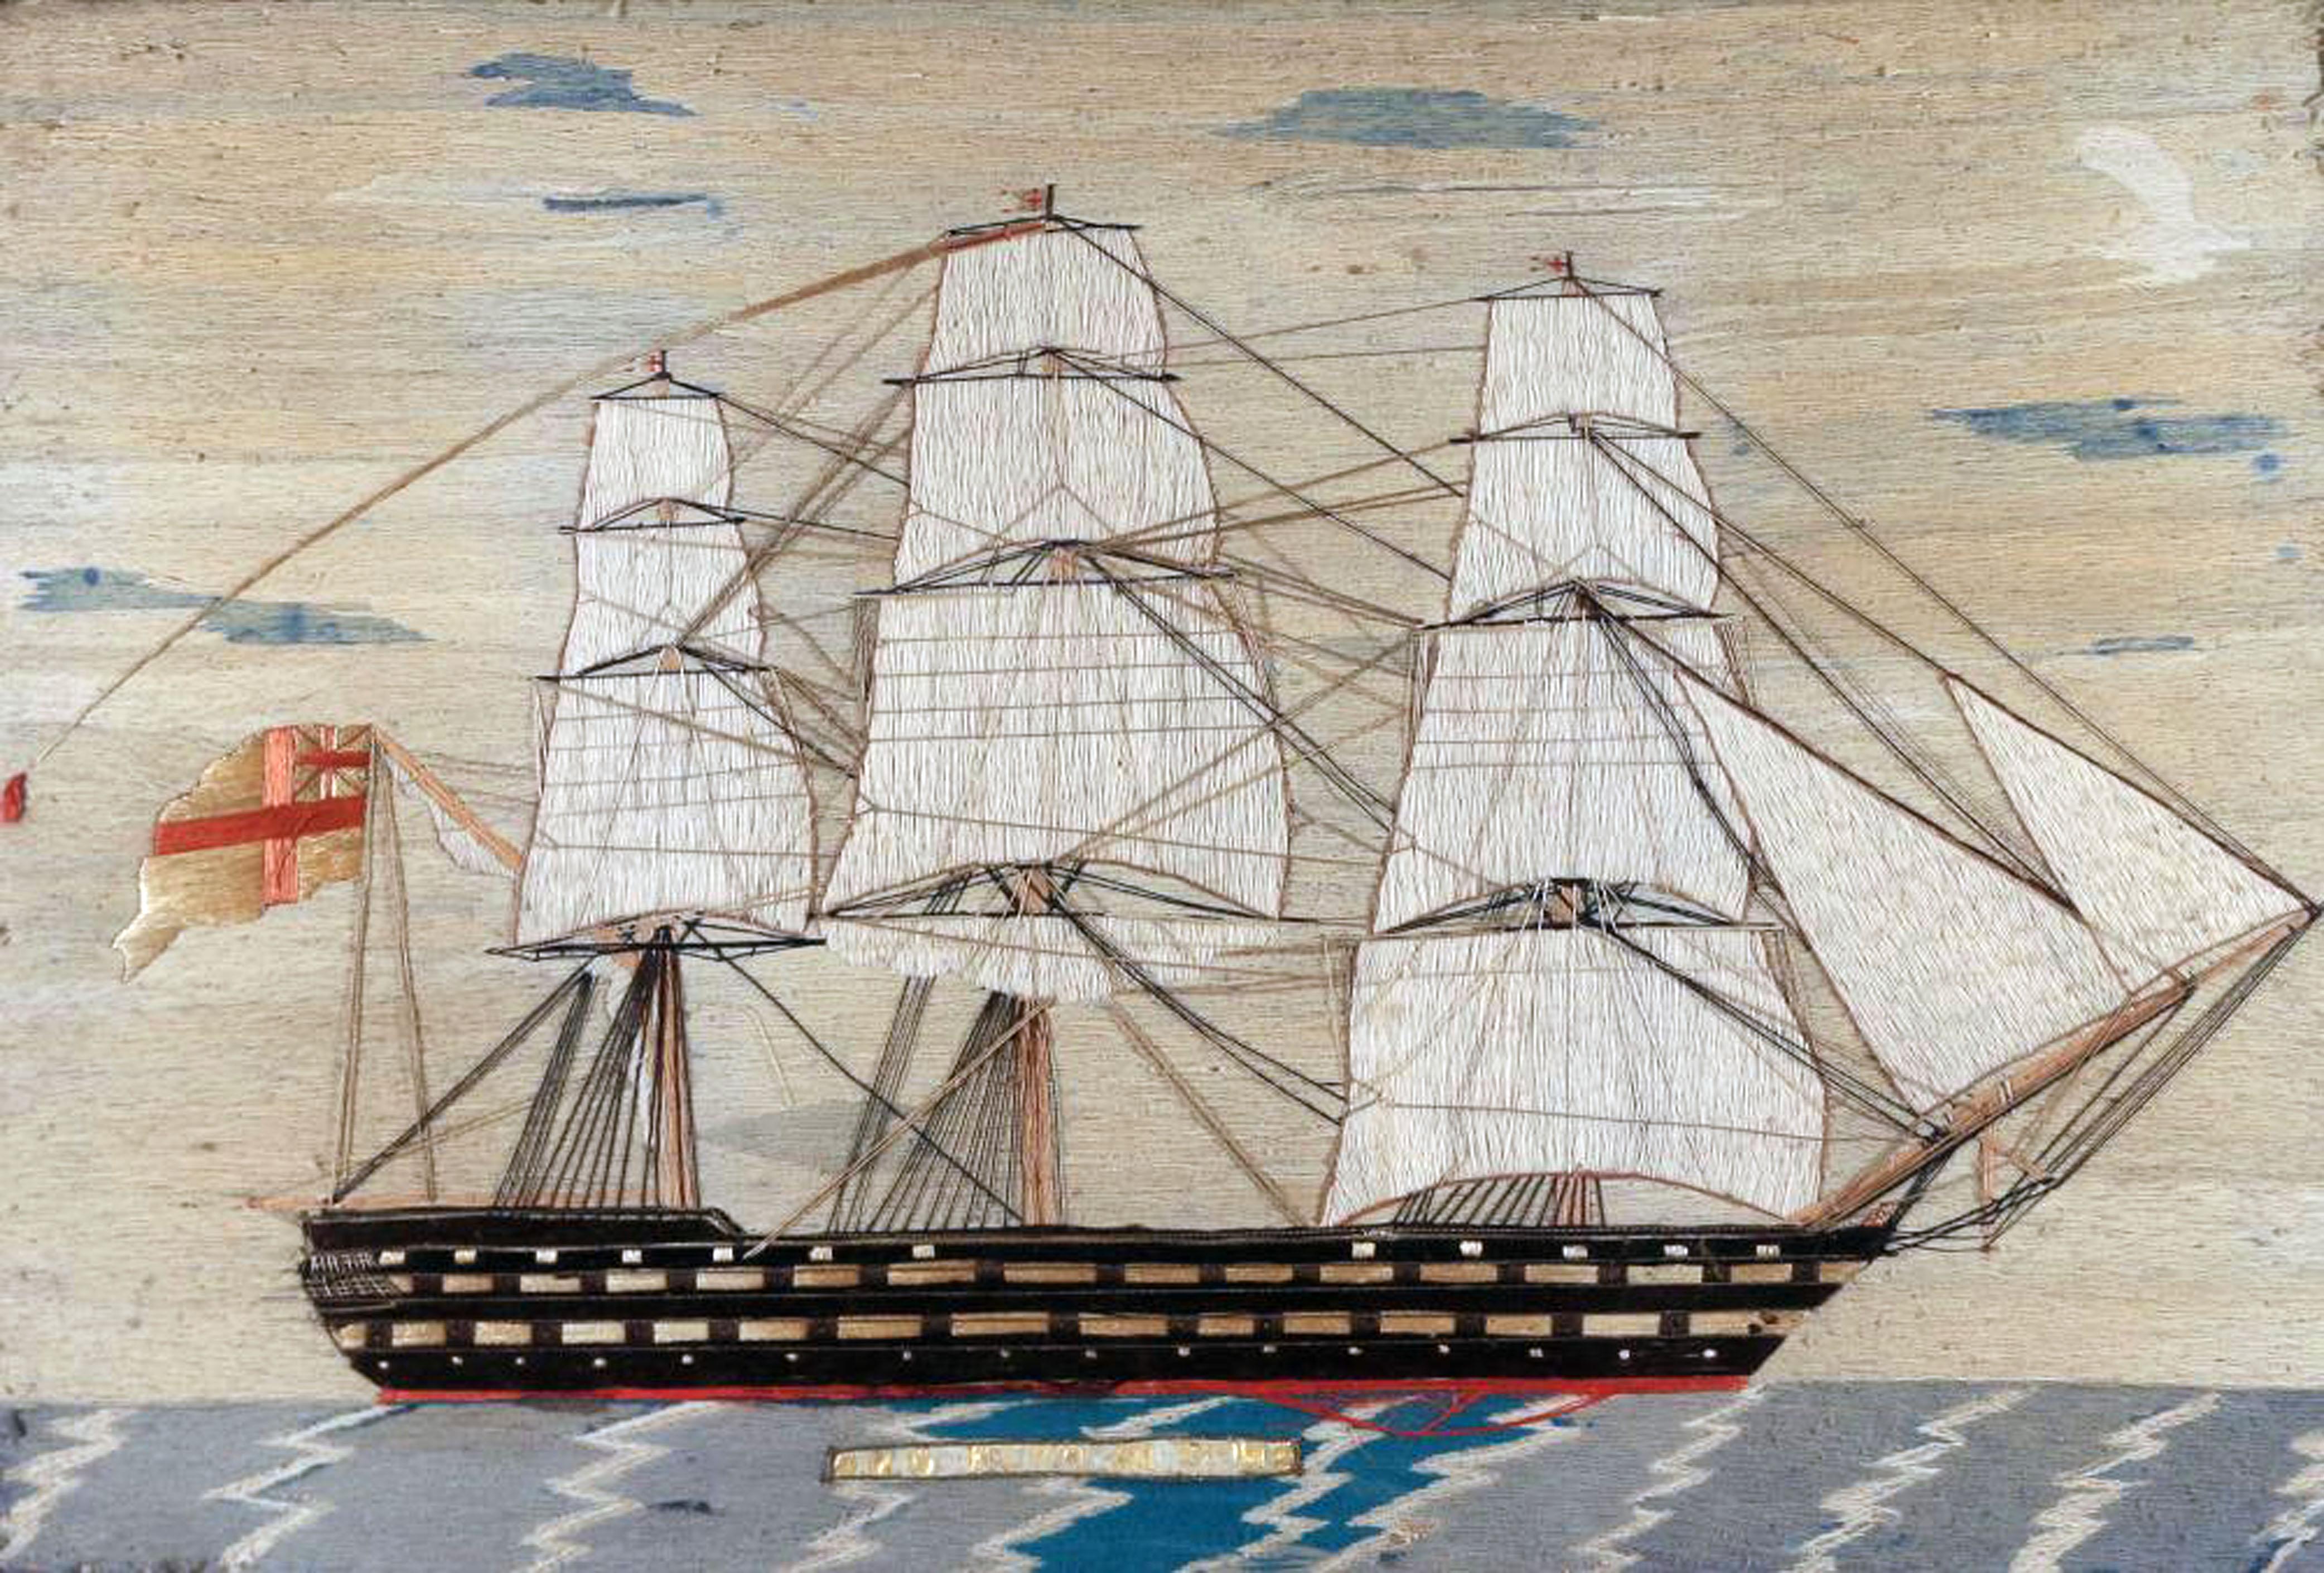 Sailor's woolwork picture of a ship, 
HMS Hero,
circa 1870.

A large starboard side view of a fully-dressed ship sailing on a white-capped sea.

Dimensions: 25 1/2 inches x 35 1/2 inches wide

This is ship was the fourth named Hero it was a